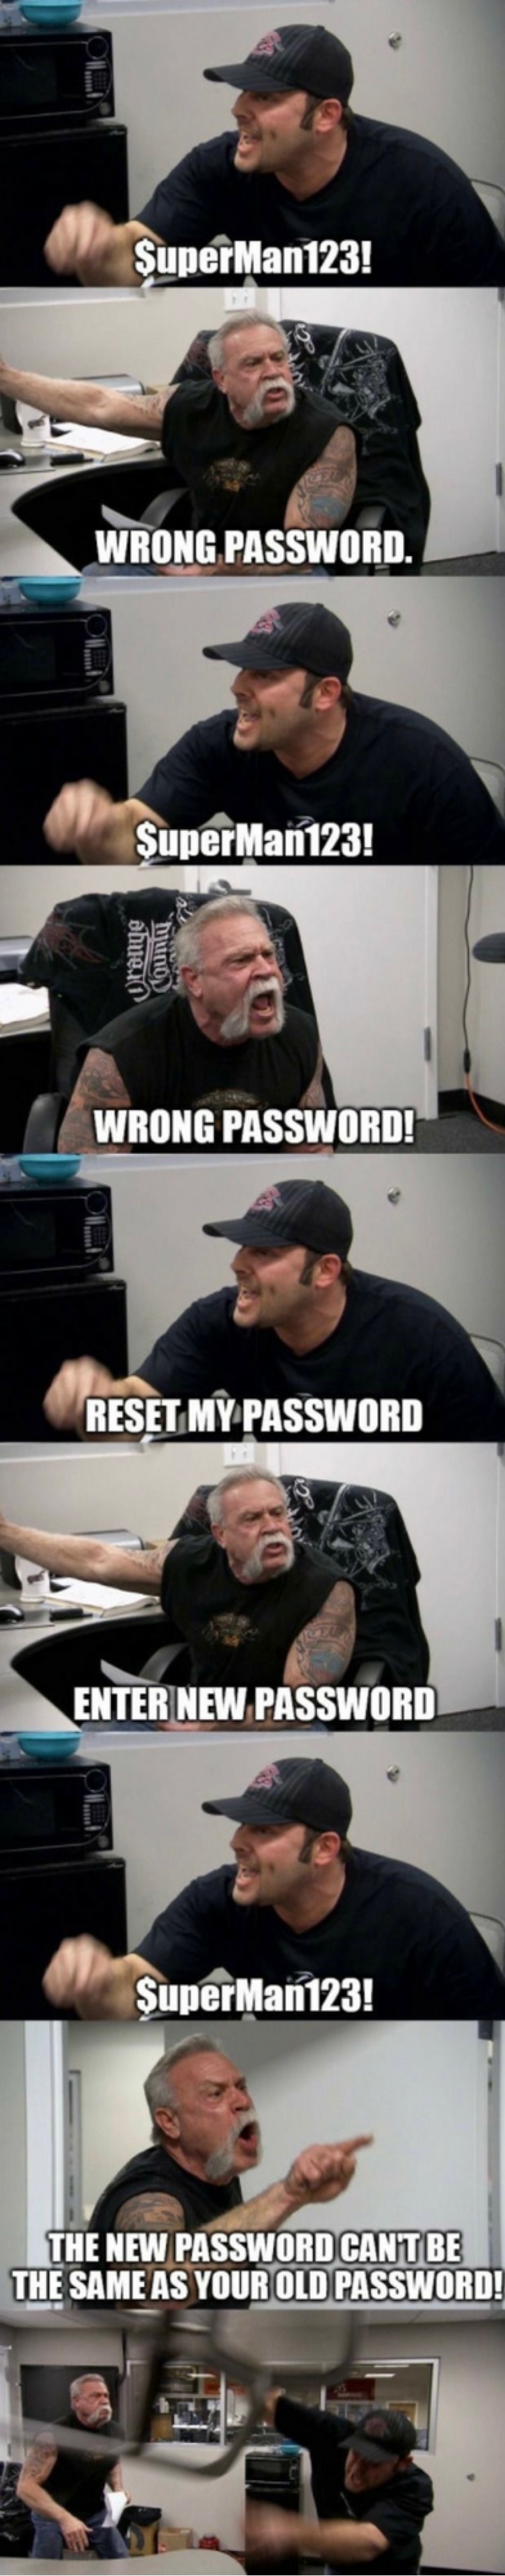 Incorrect password entered. Password is Incorrect. Wrong password футболка. I was wrong. Awesome Entertainment.